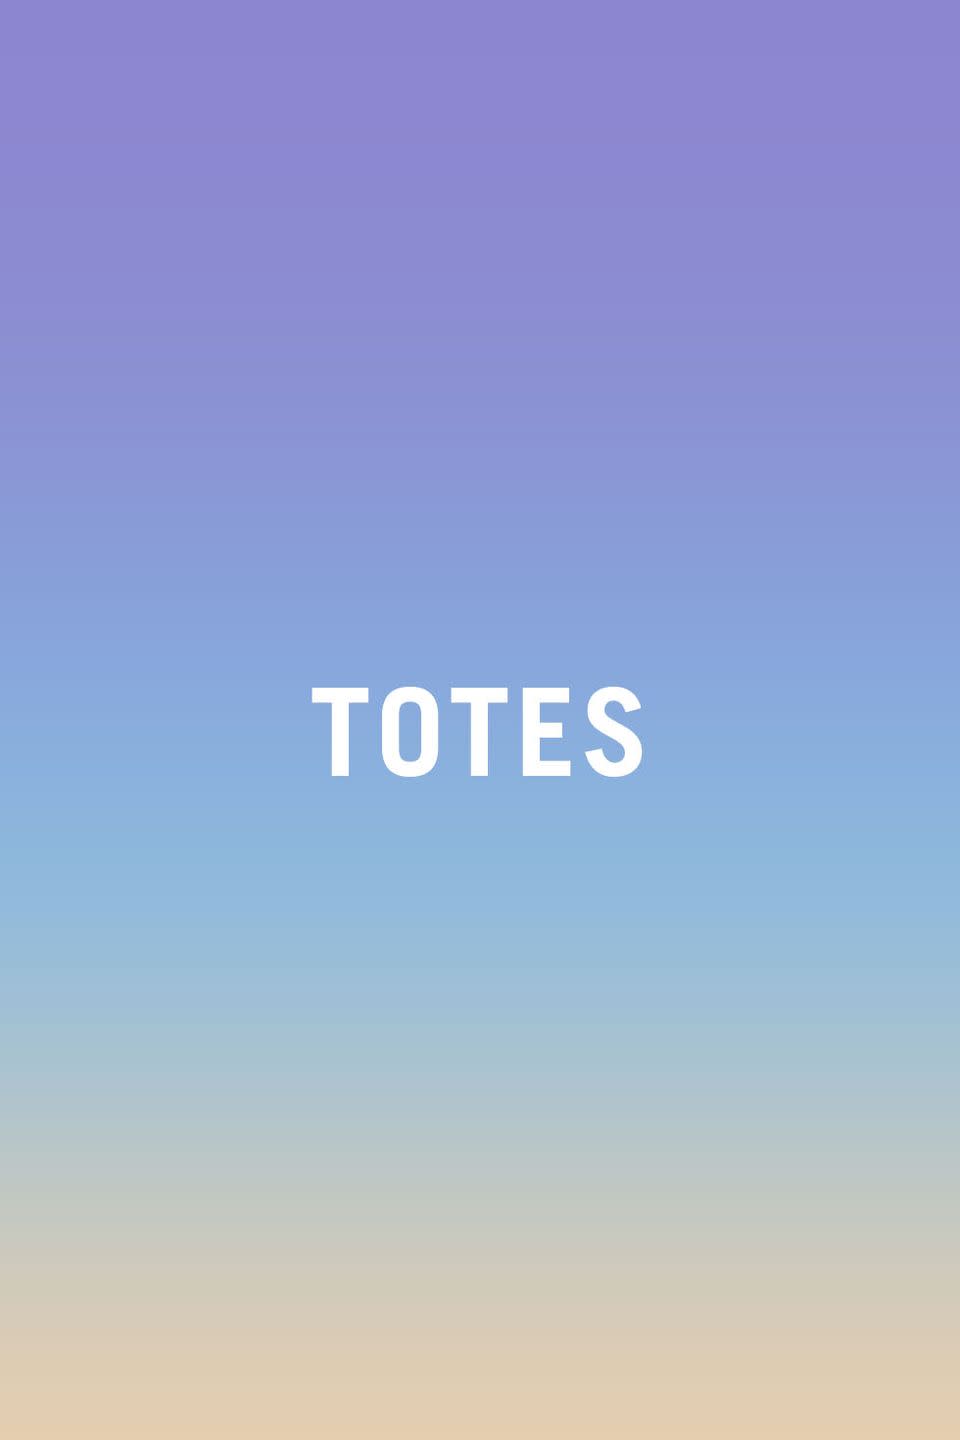 <p>Totes is teen-girl shorthand for totally — which means that by its very nature it's impossible for adults to say without sounding silly. It also <i>is</i> silly. Just say the whole word! See also: adorbs, gorg, probs, and whatevs. </p>